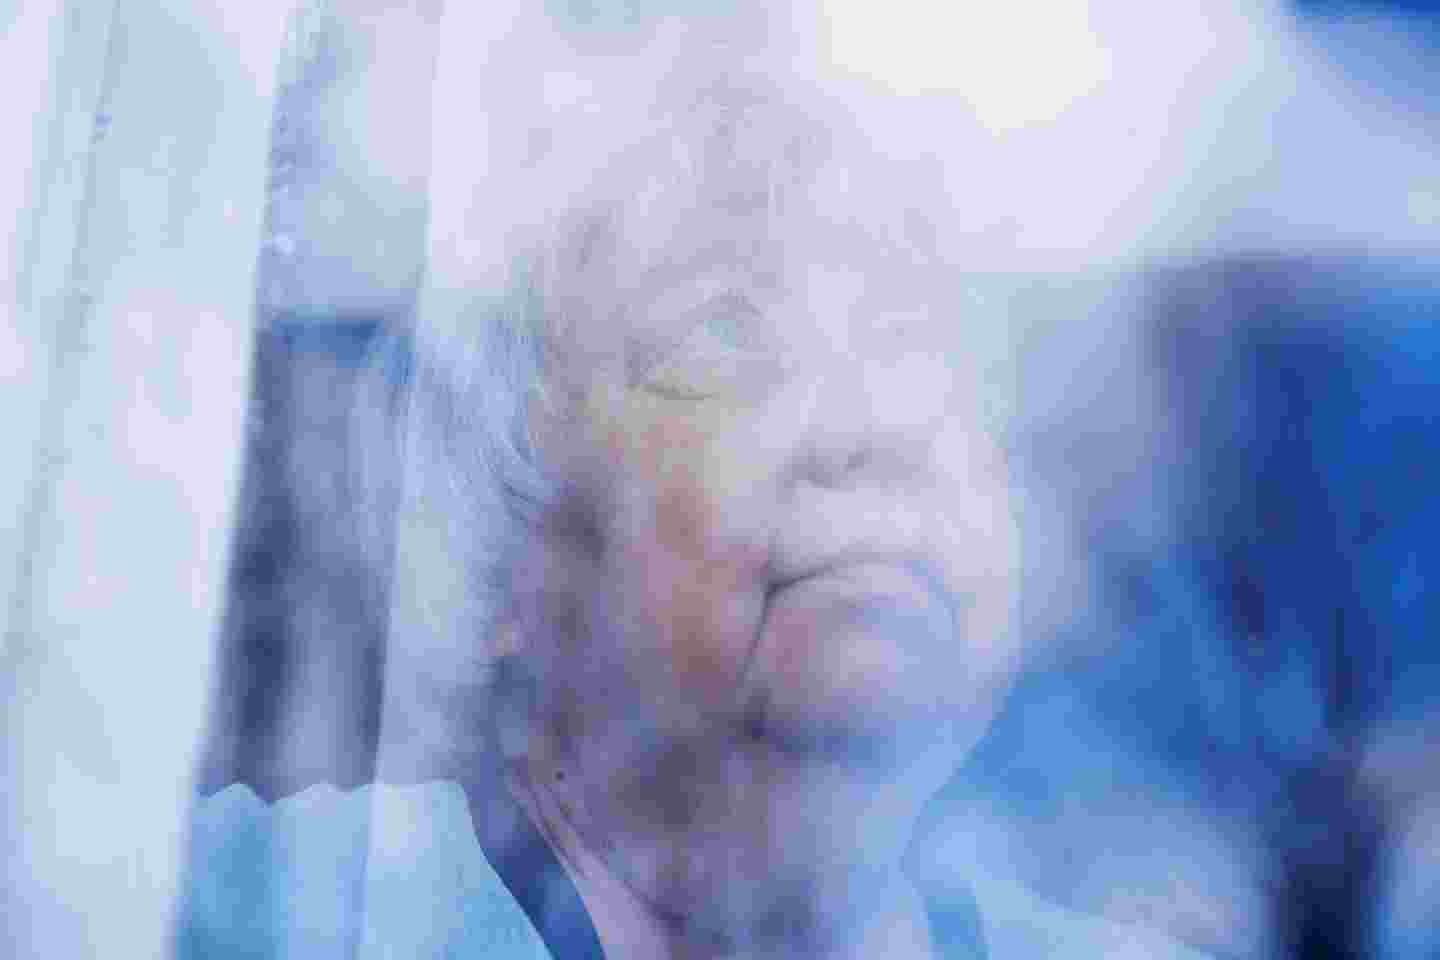 An elderly woman with a serious expression looking out of a window.